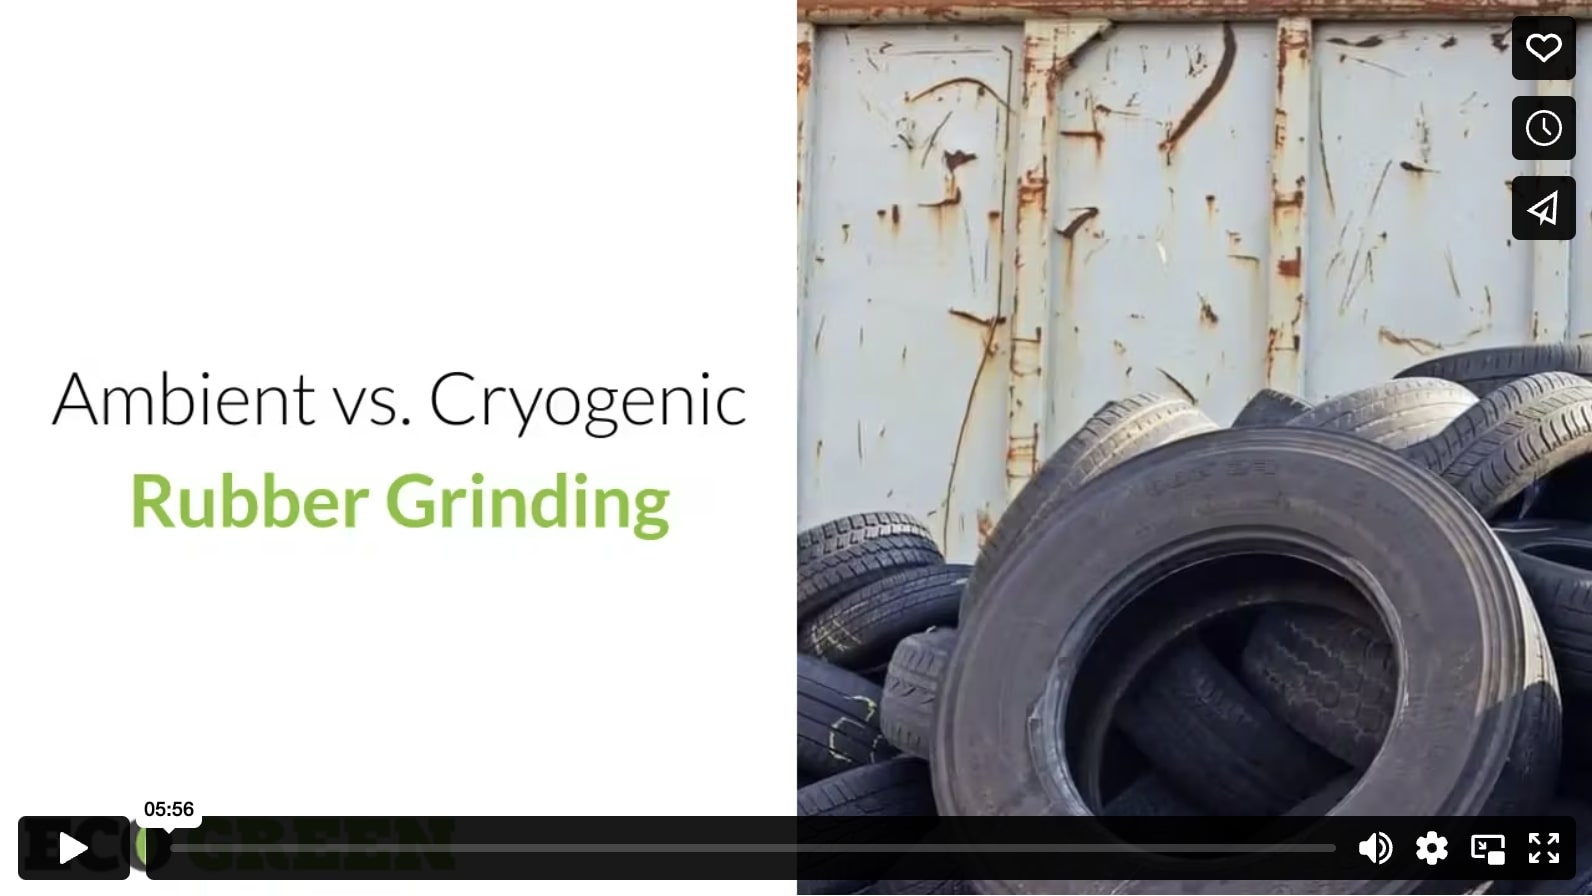 Ambient vs. Cryogenic Rubber Grinding